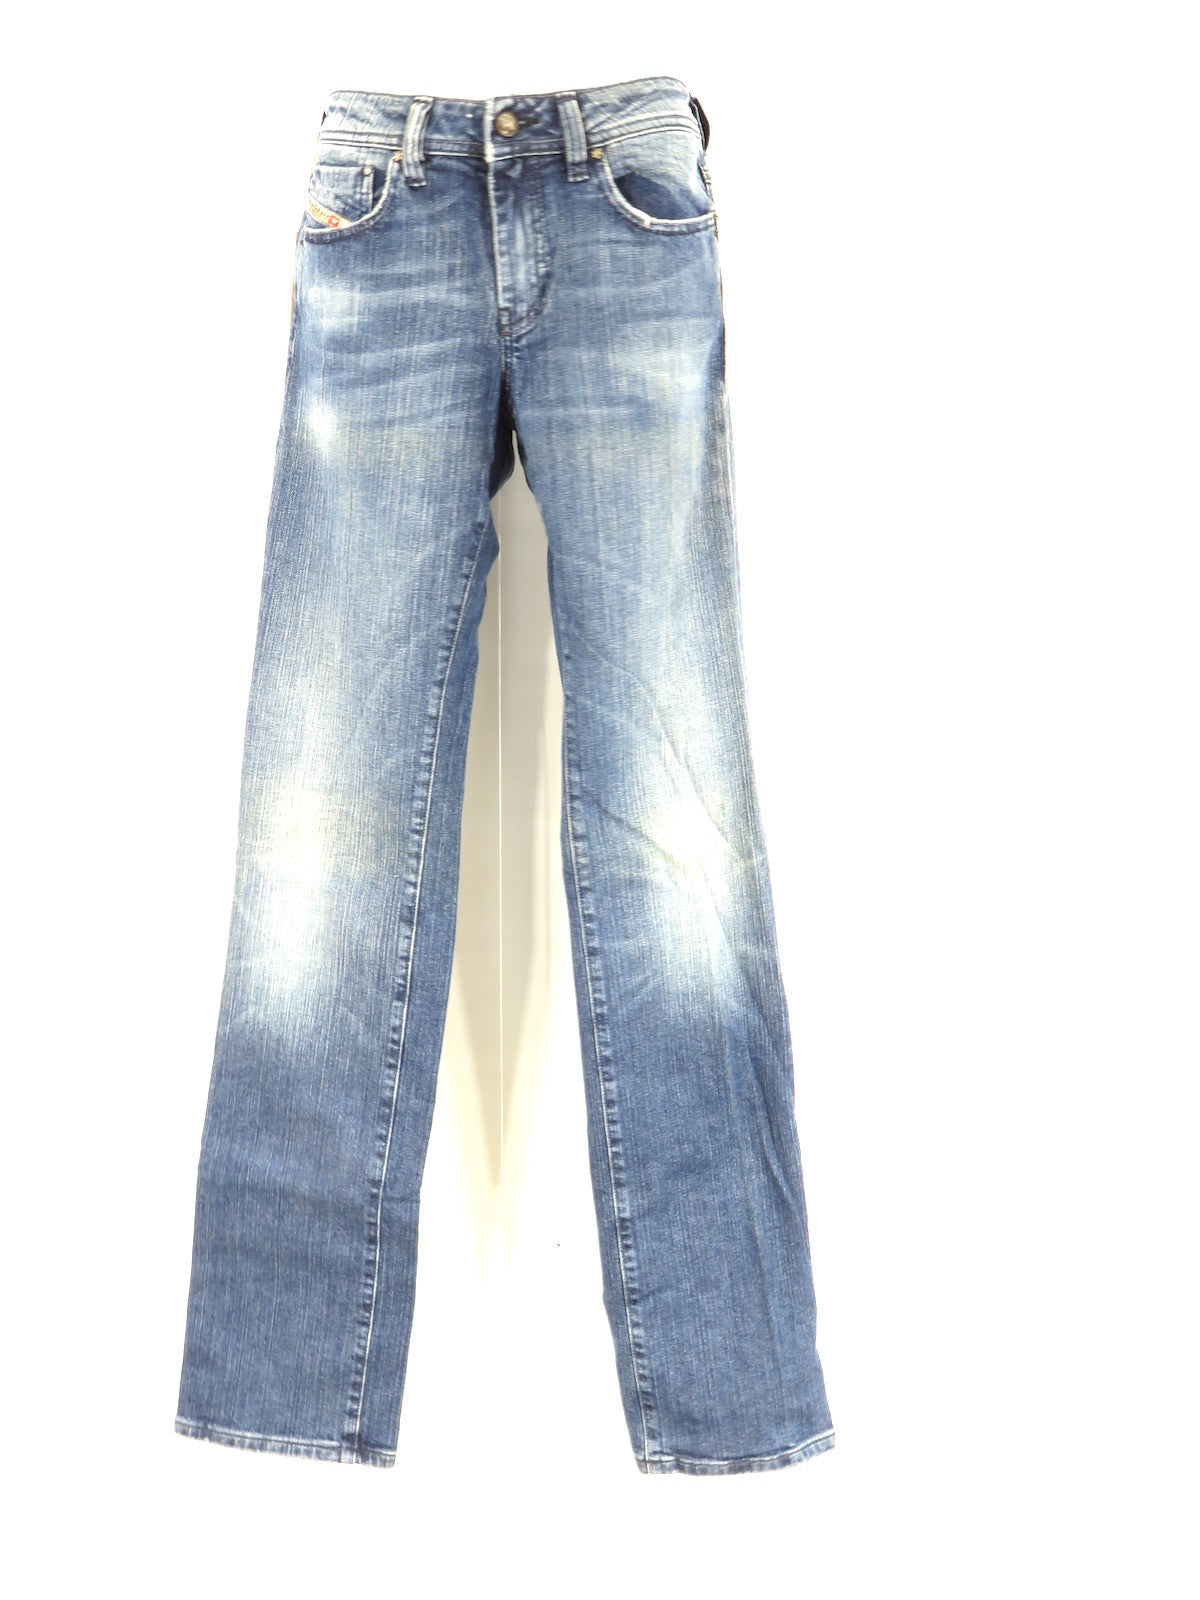 dsquared2 cool guy jeans